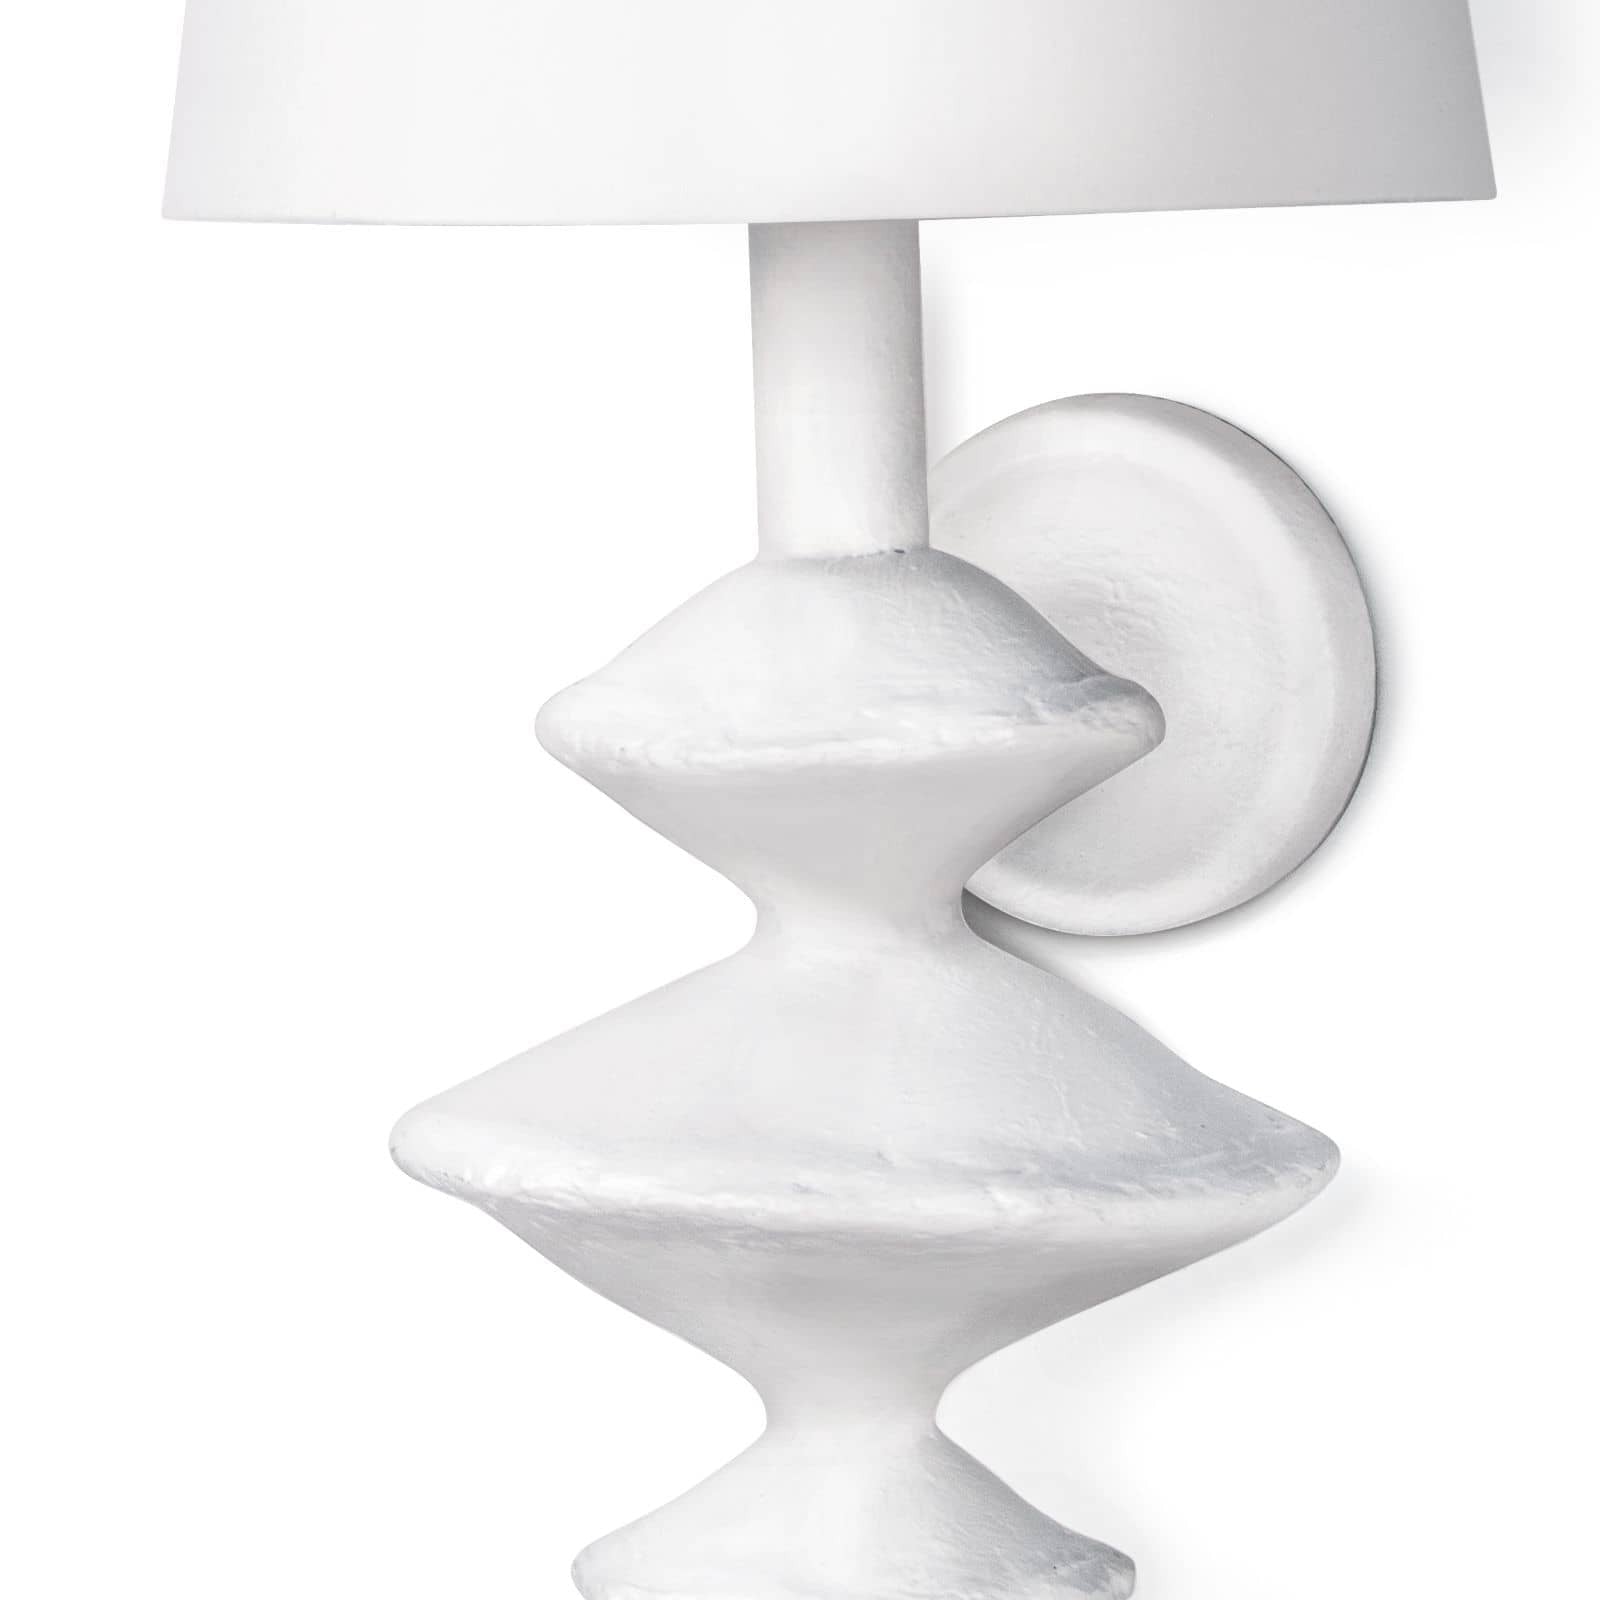 The curves on this Hope Sconce with the matte white finish give this sconce a textured look. This is inspired by a paper mache sculpture and would look amazing lined down a hallway, in your living room, or other space in your home needing extra light.  Overall size: 10"w x 10"d x 21"h